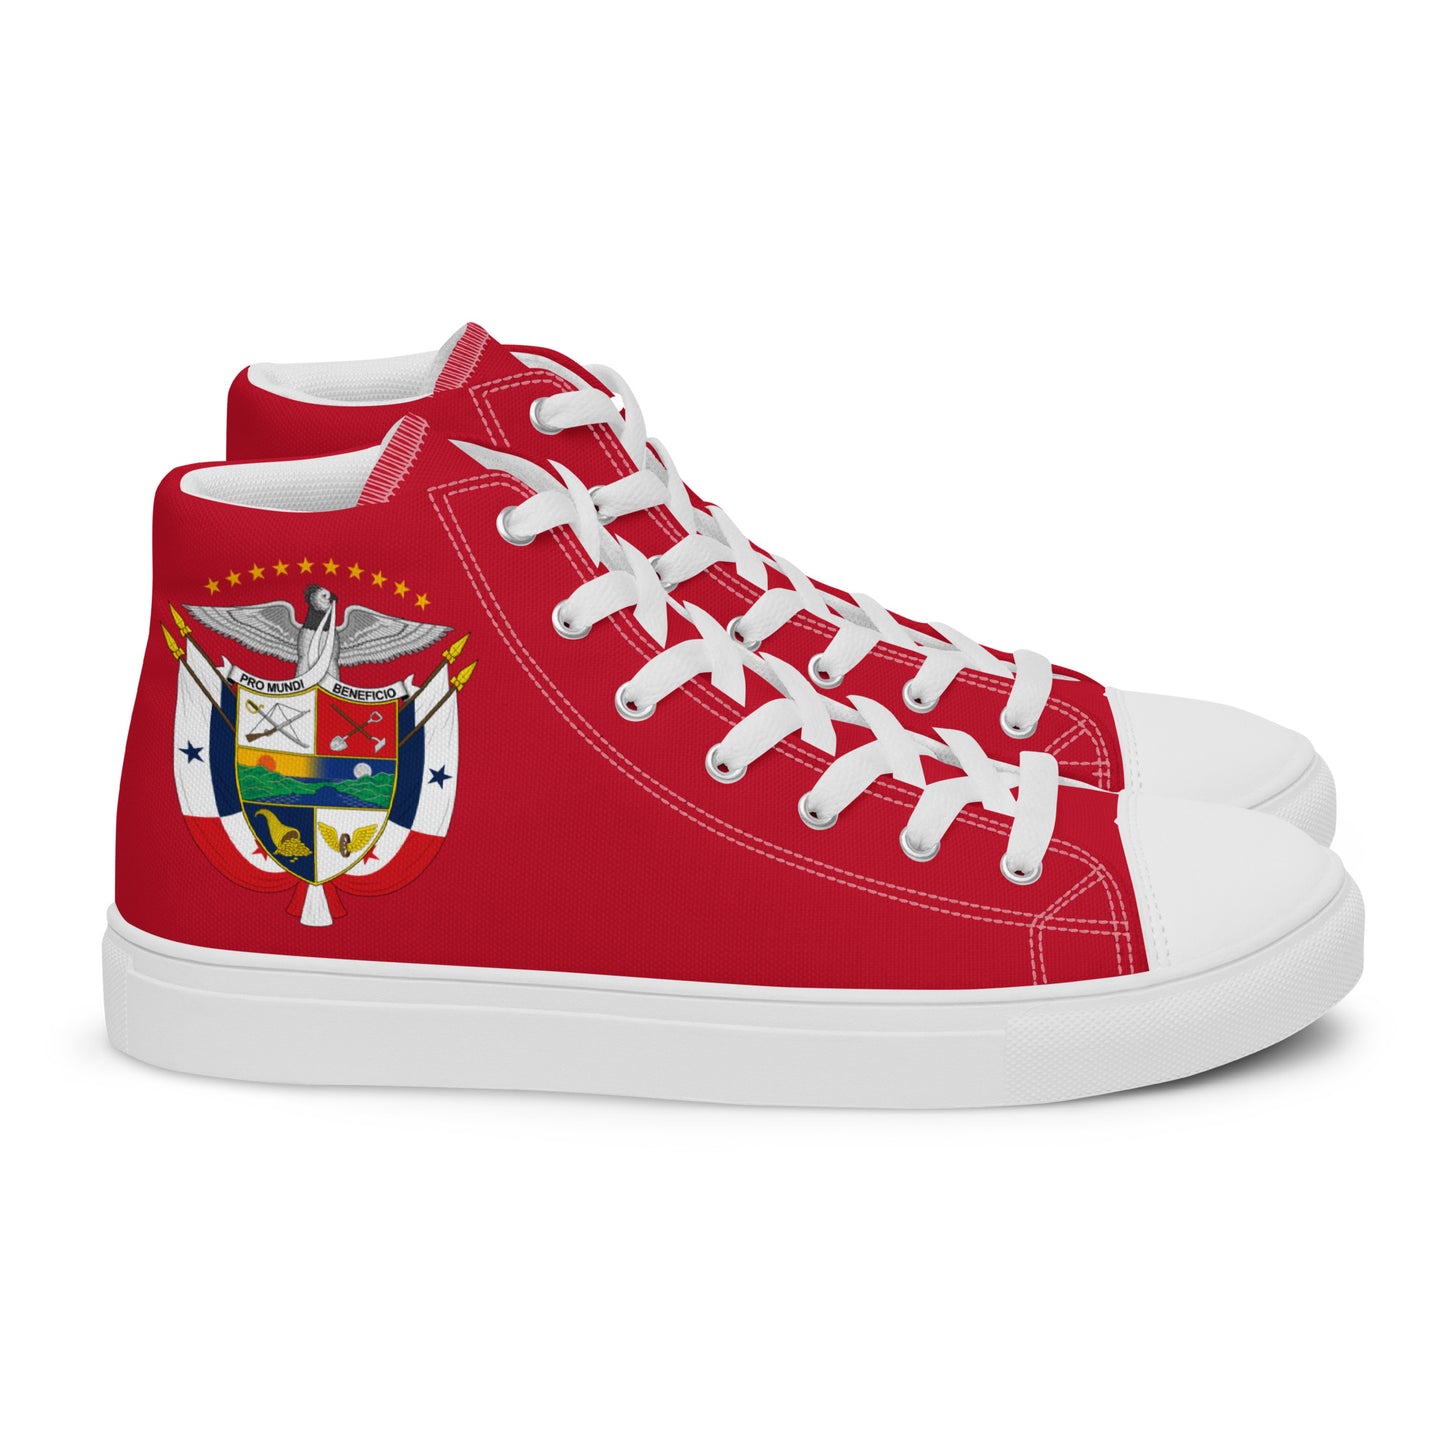 Panamá - Women - Red - High top shoes